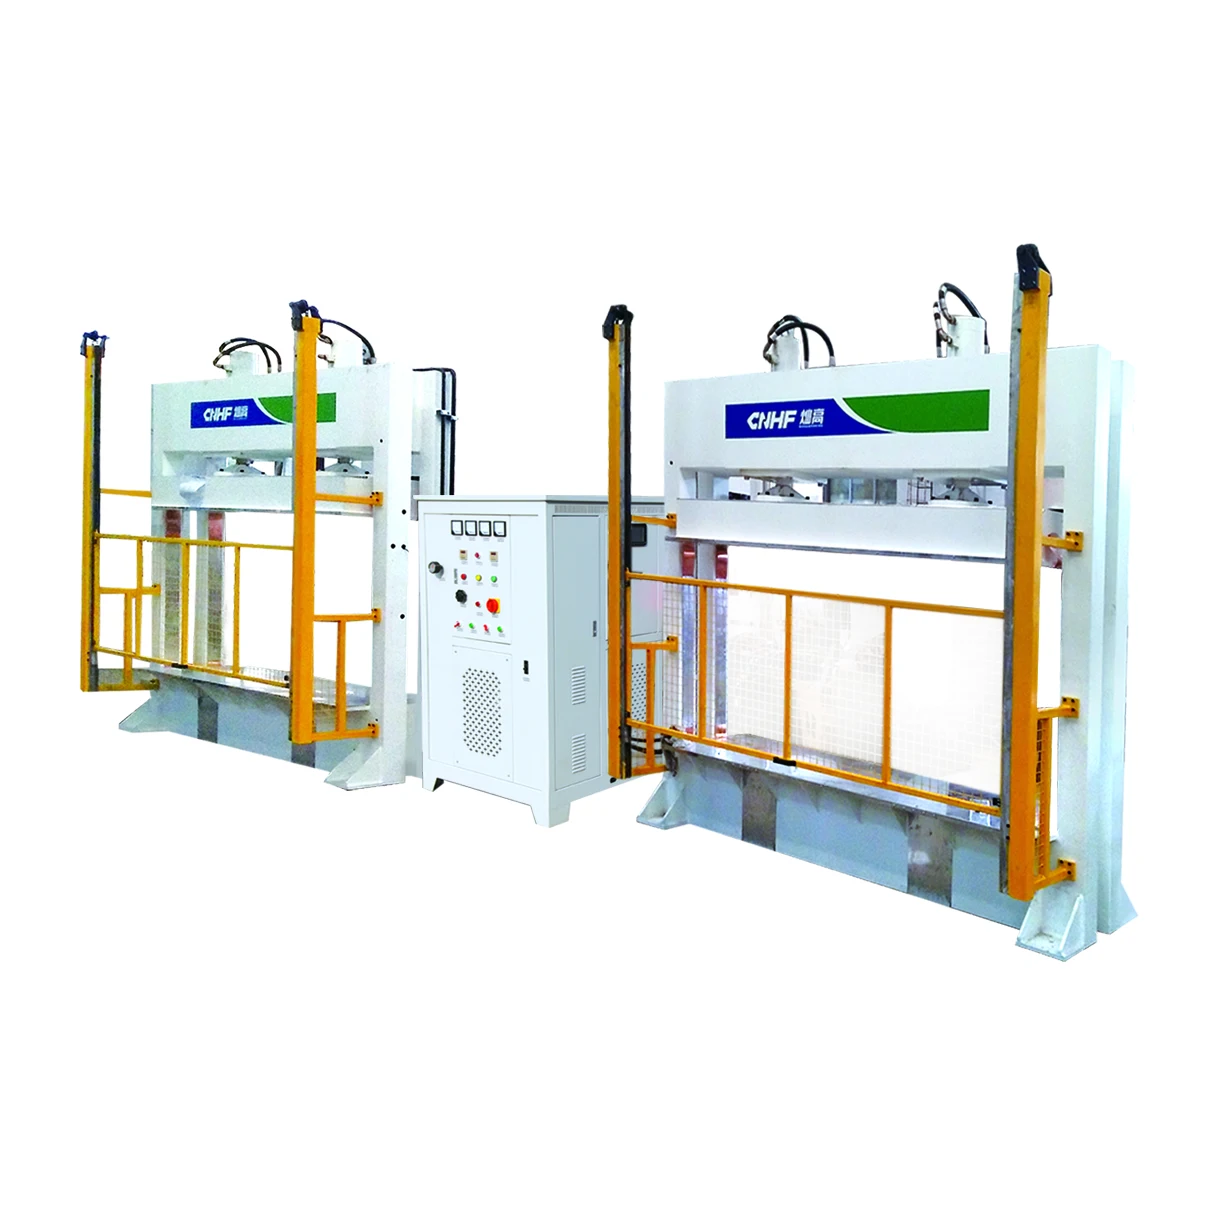 HF hot press machine for woodworking